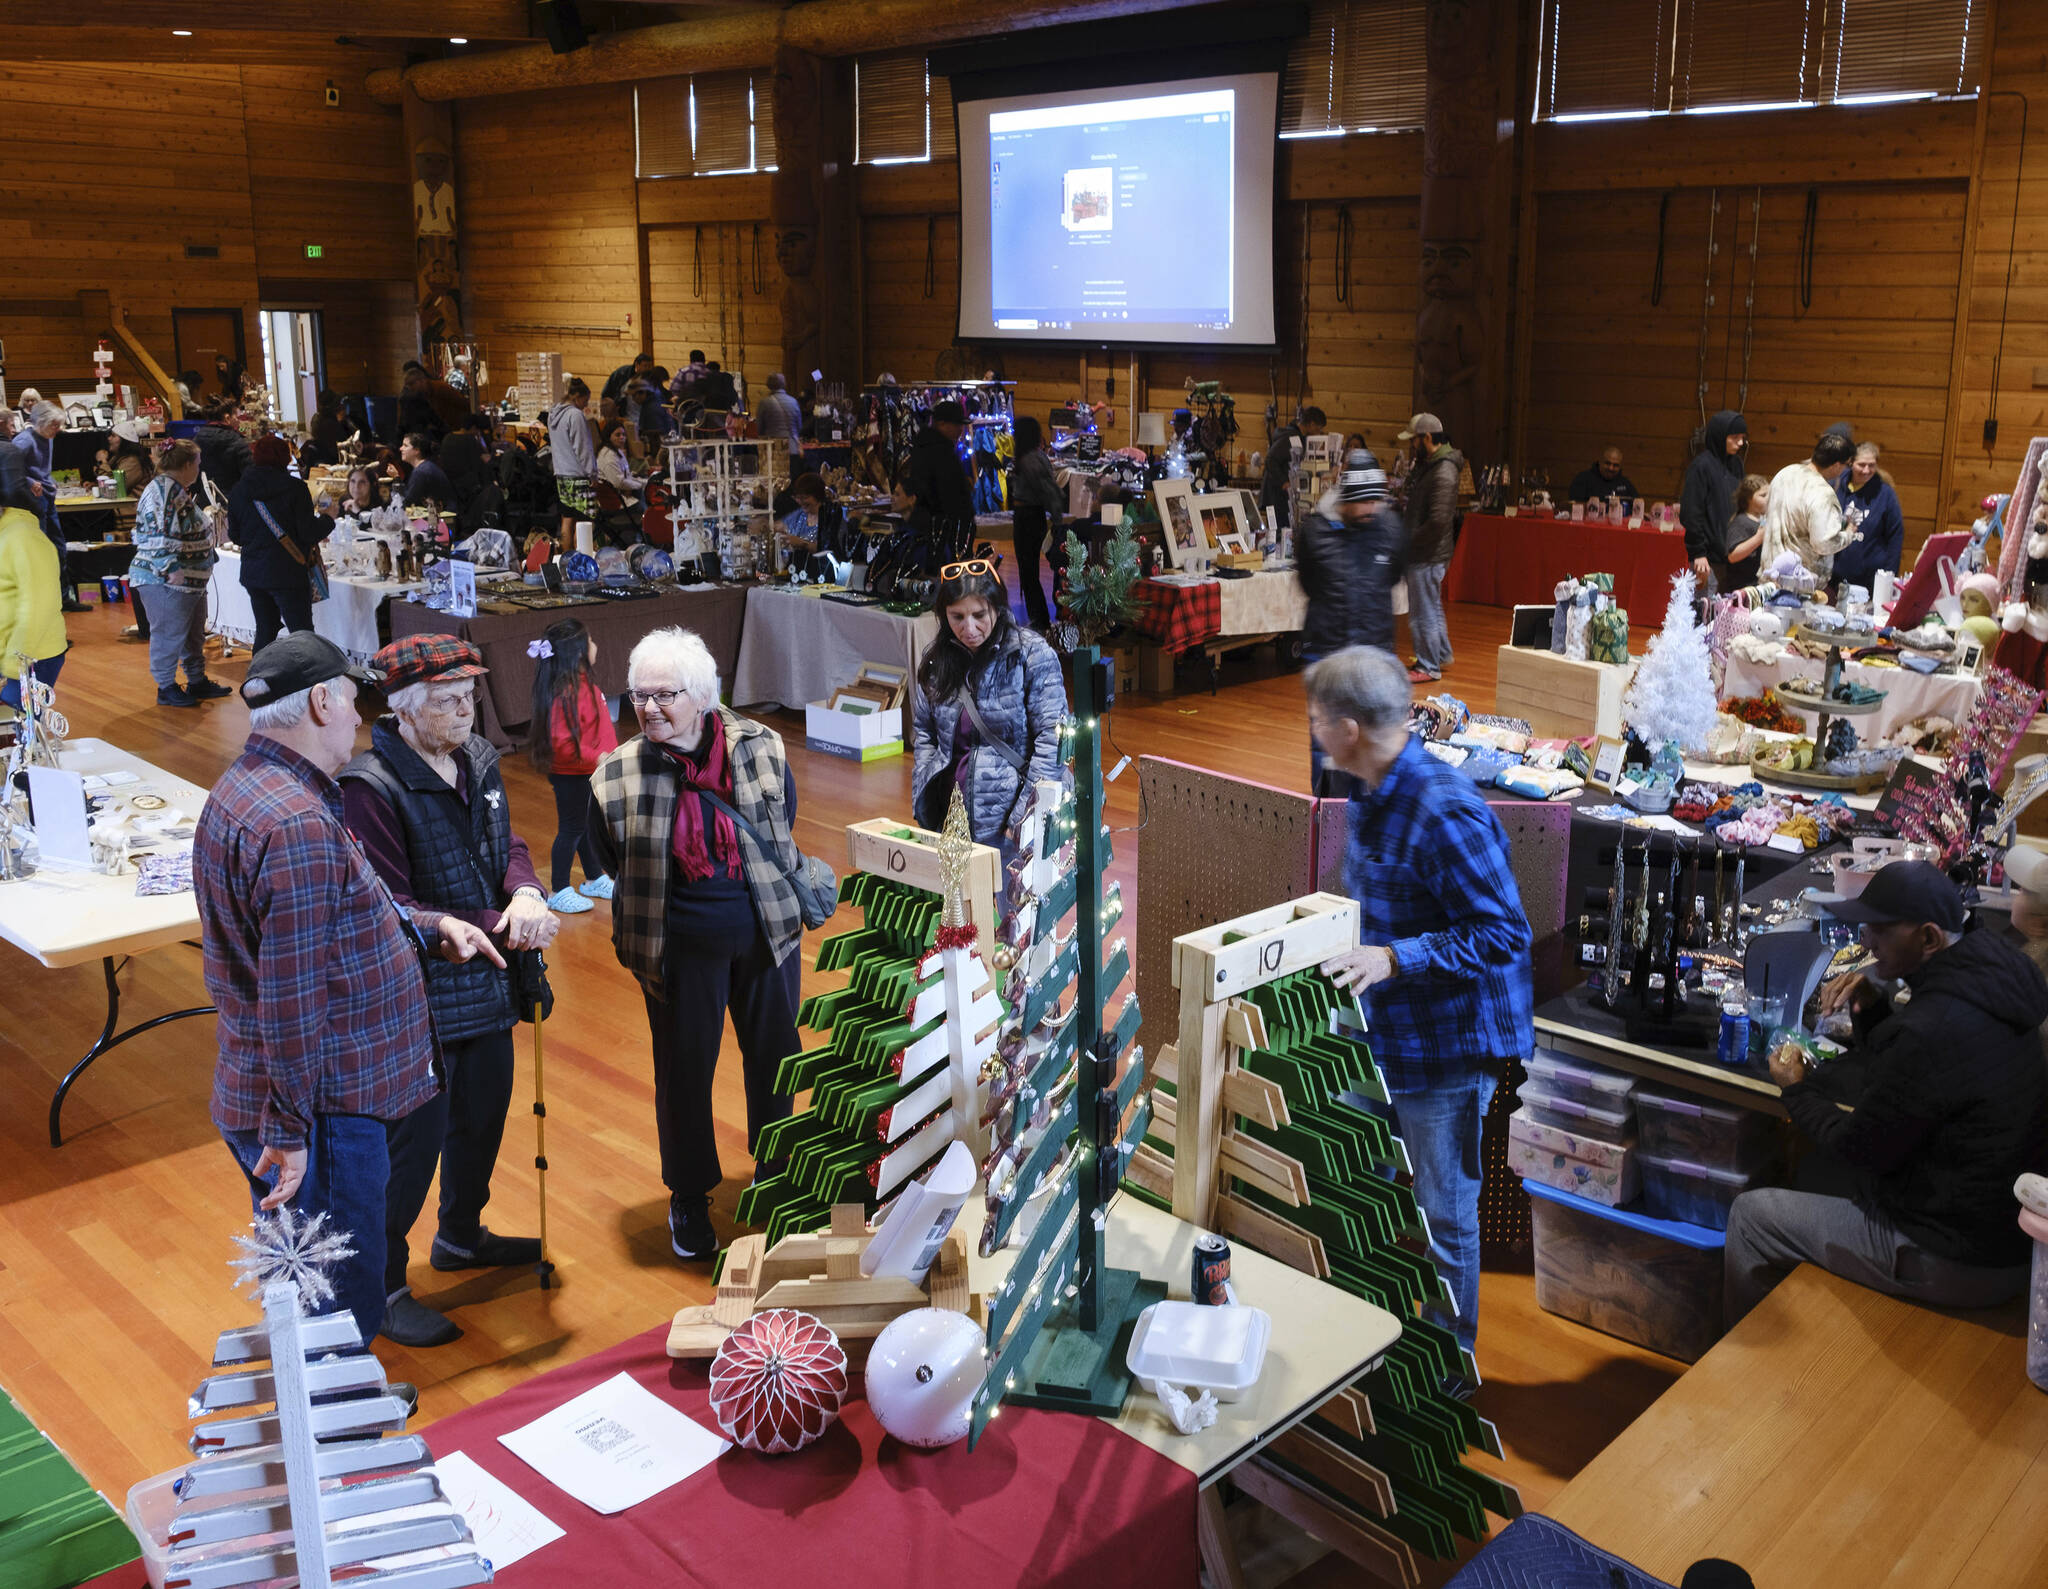 Damon Williams/Kitsap News Group photos
Attendees seeking holiday gifts check out items at a recent craft fair in Suquamish.